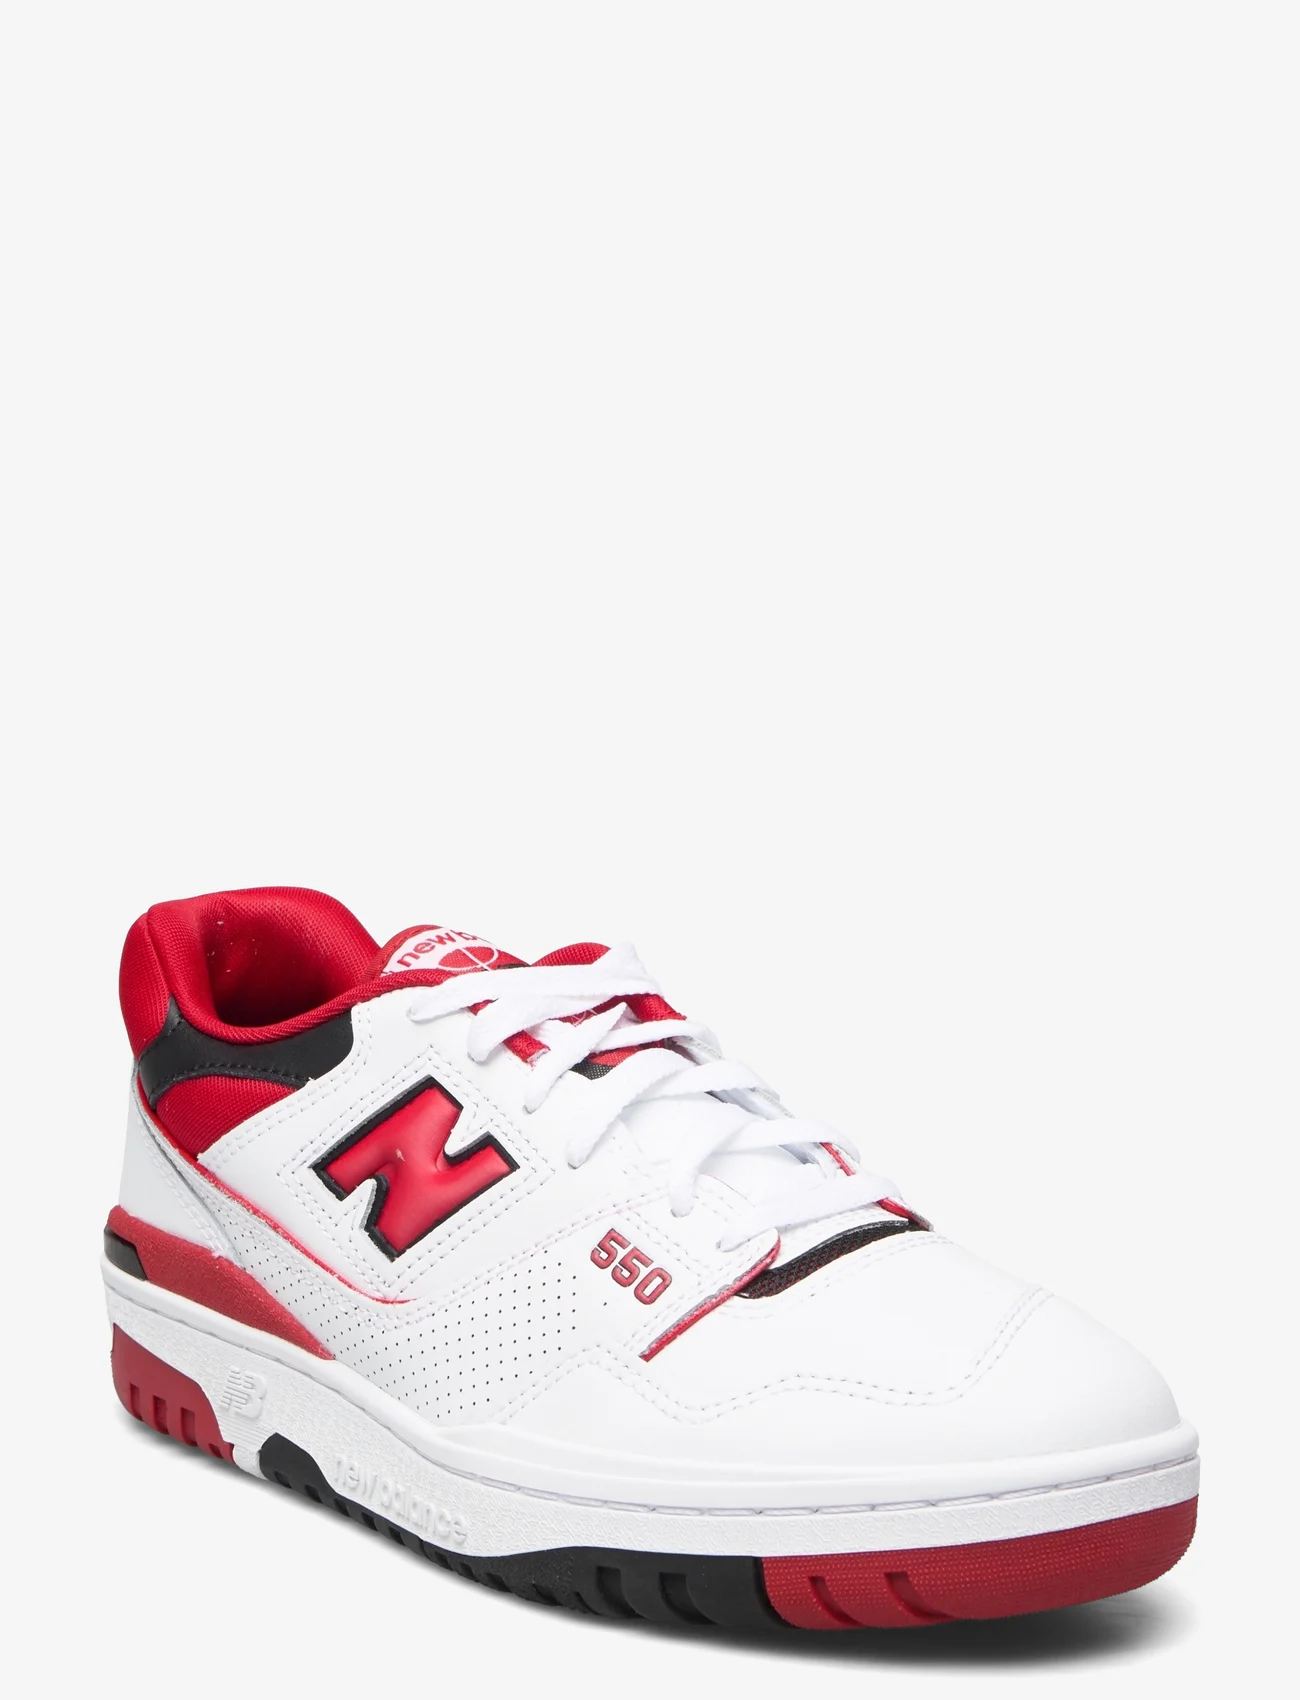 New Balance - New Balance 550 - laag sneakers - white/red - 0